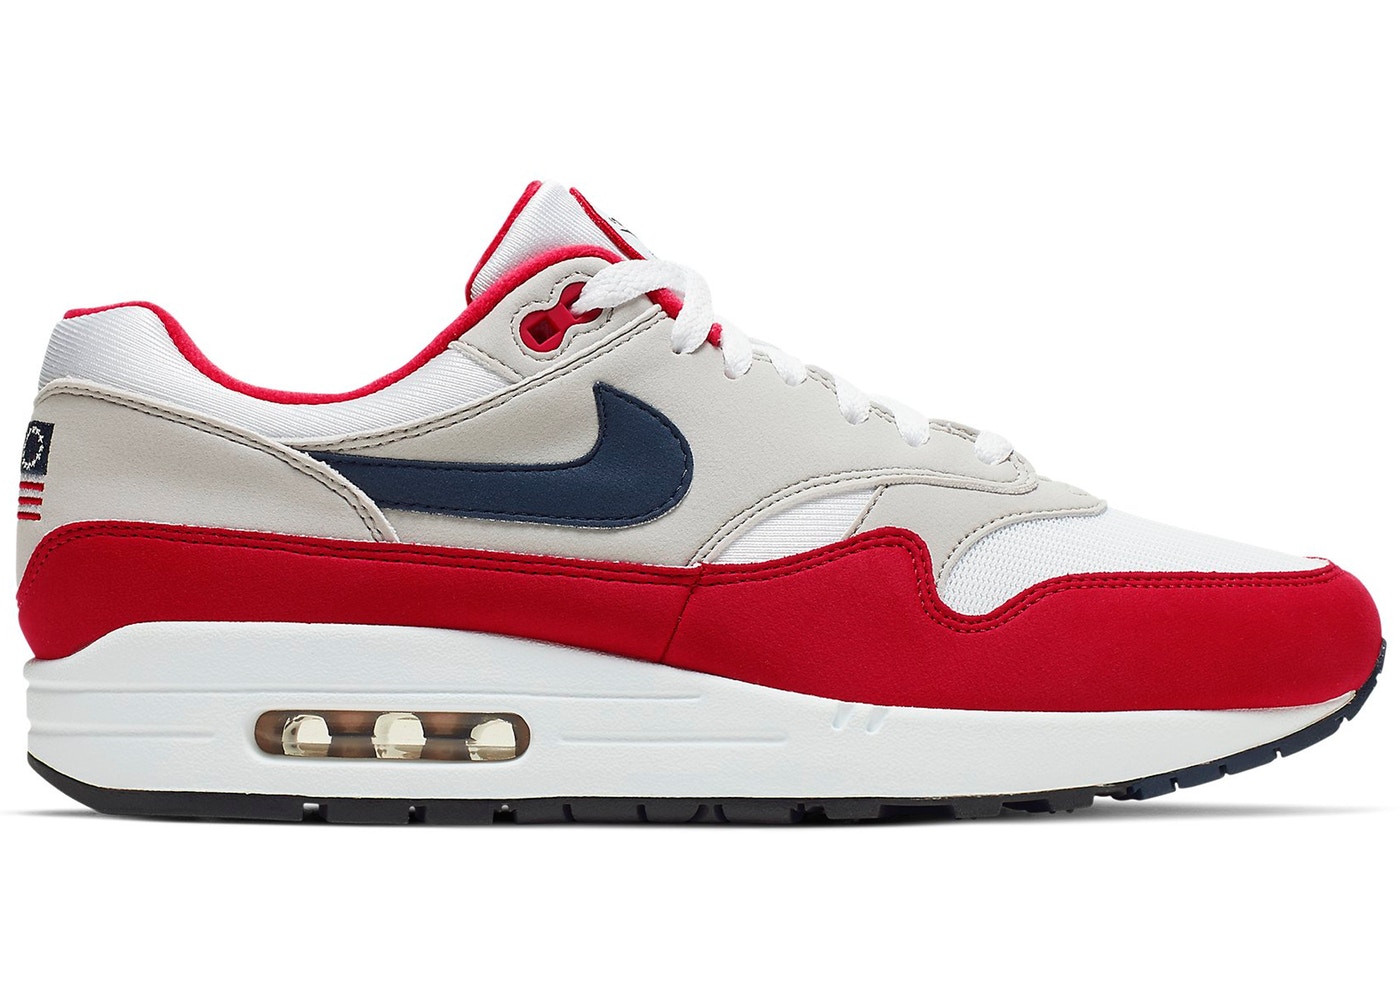 Now Available: Nike Air Max 1 QS \